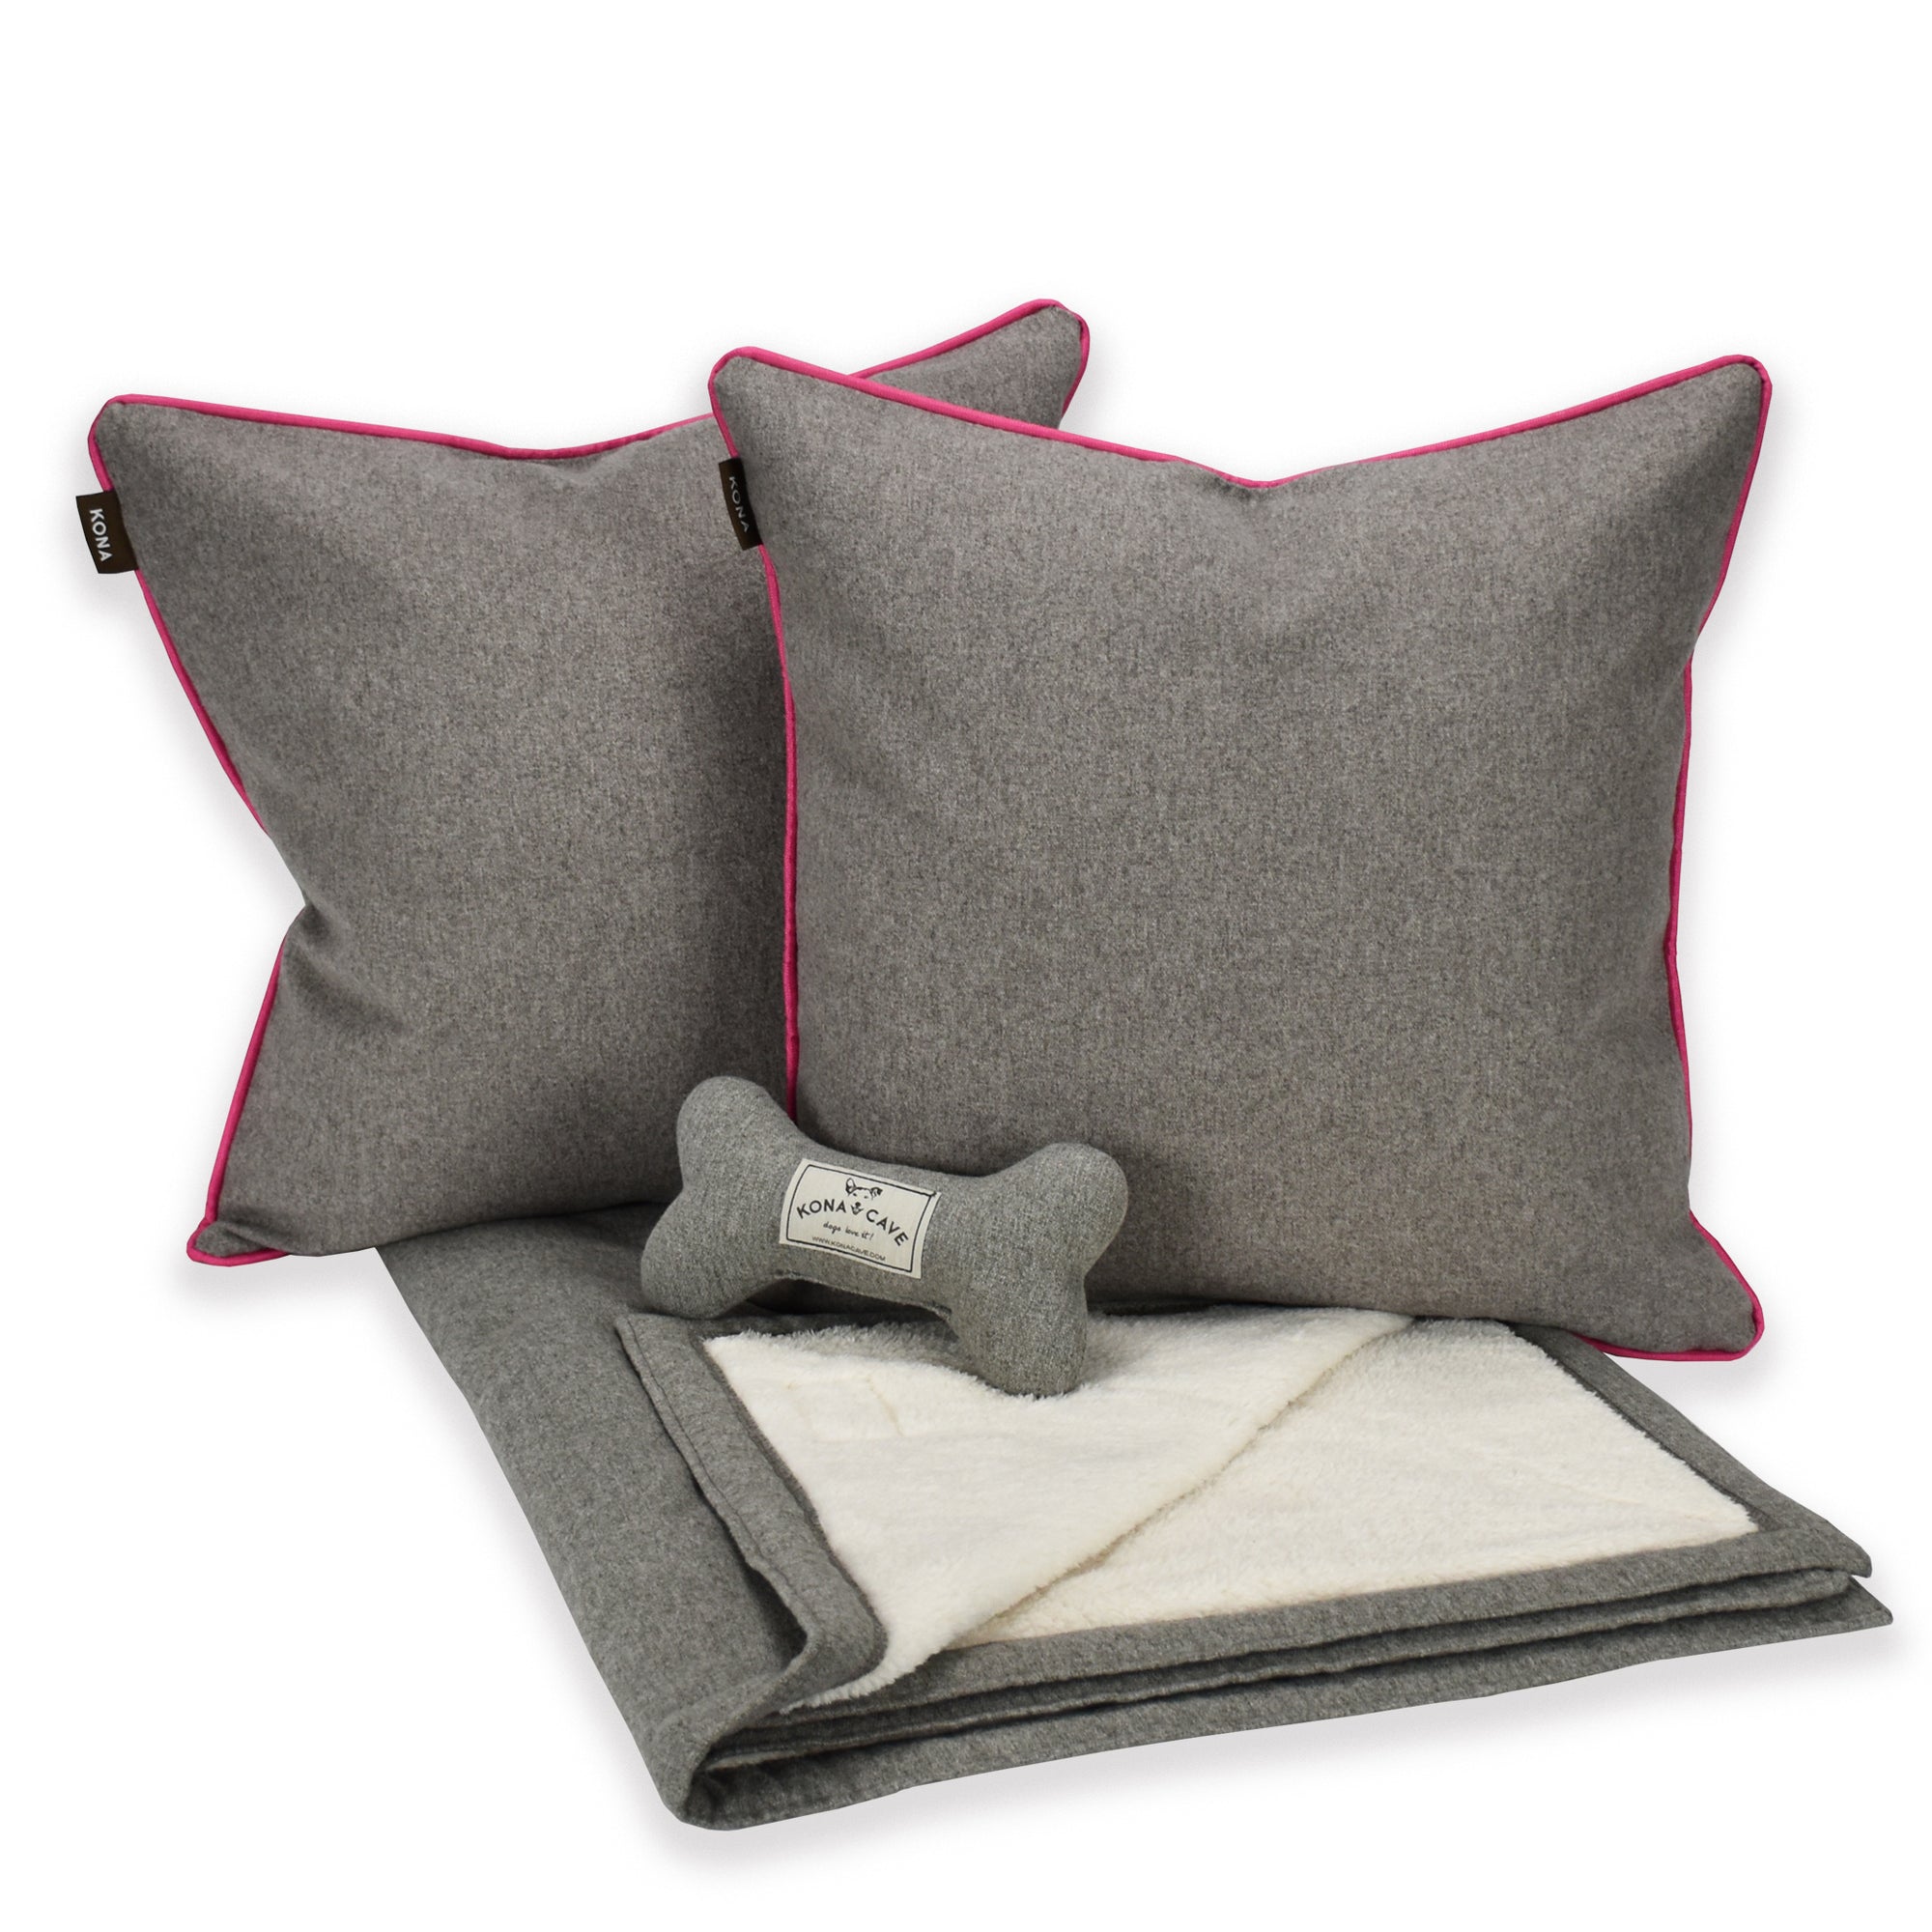 Doggy Décor Set - Grey Flannel with Hot Pink Trim